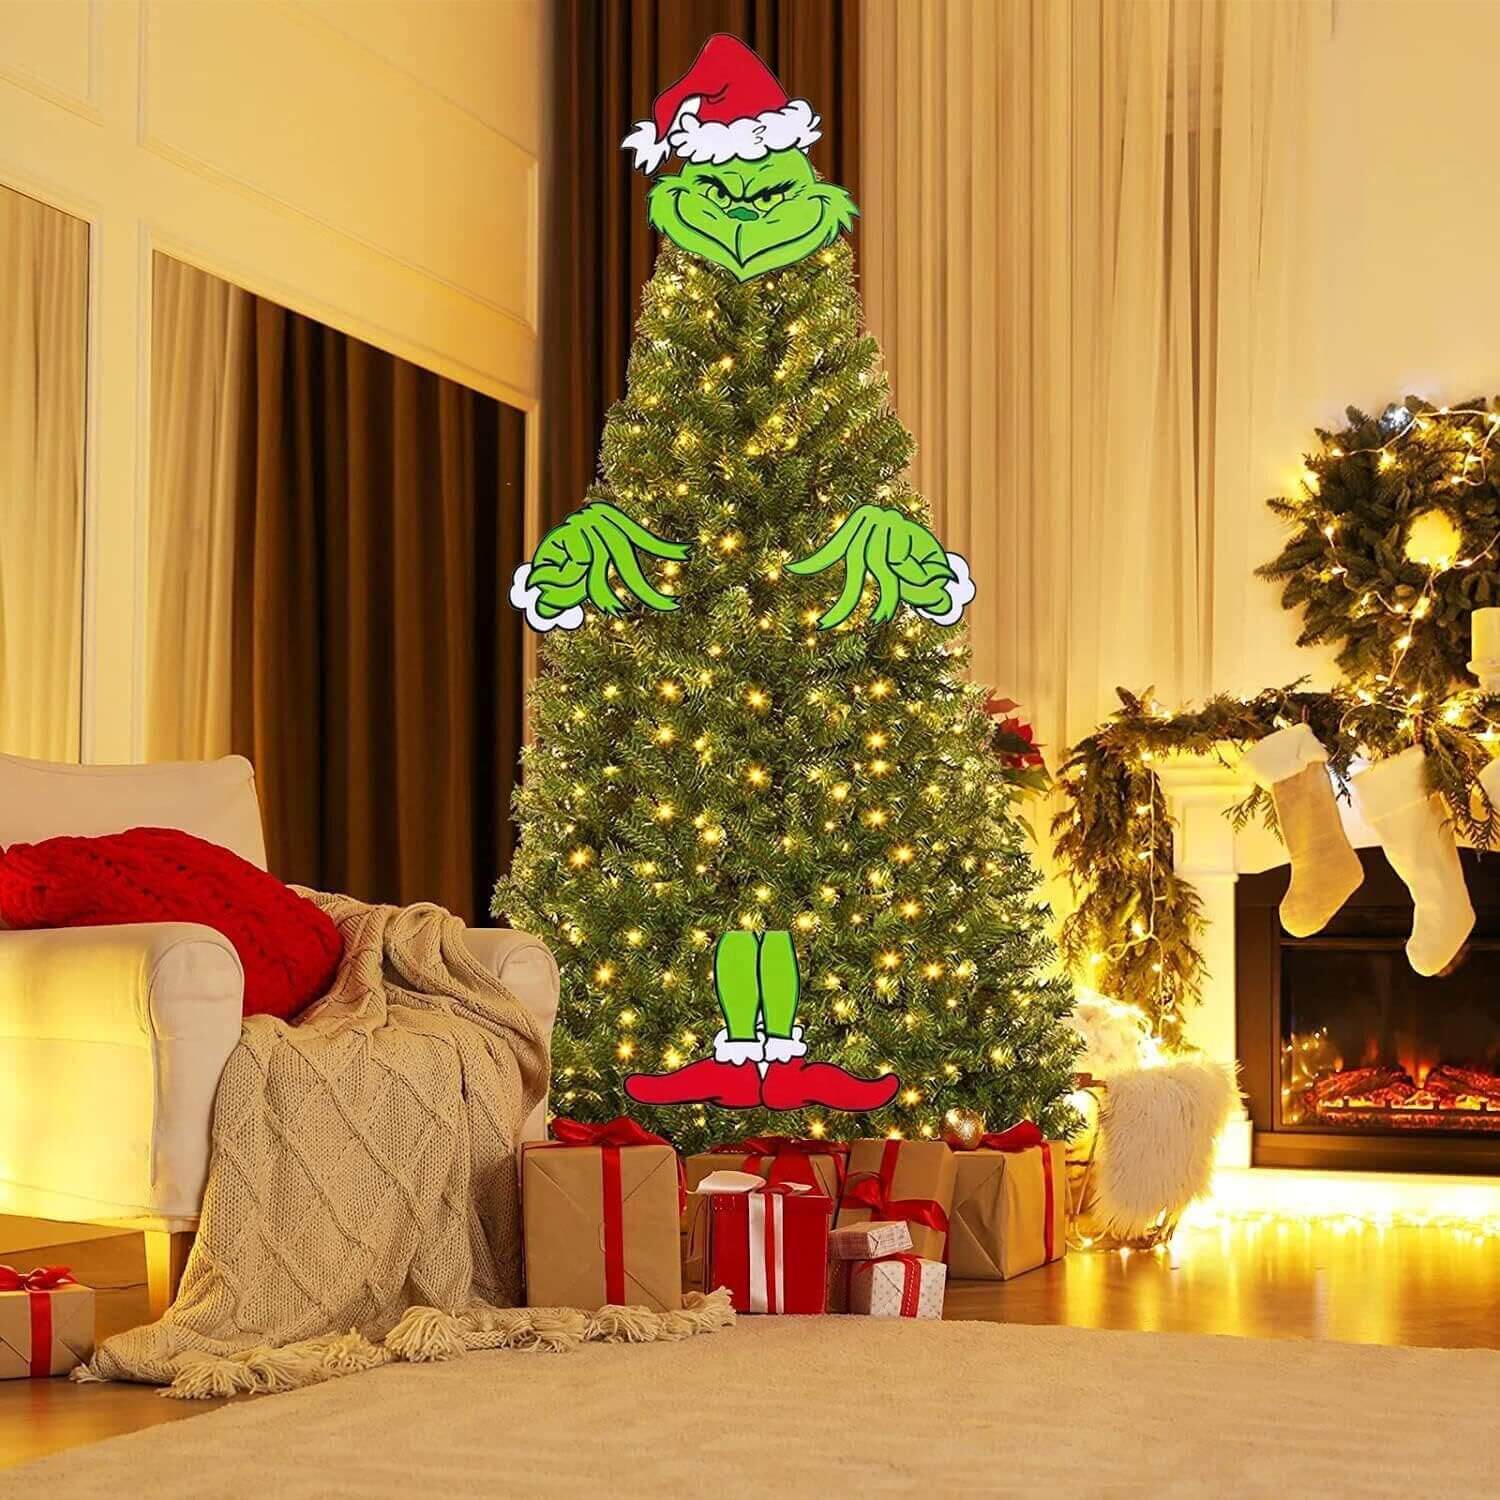 Let's Get Grinchy With The Grinch Christmas Tree Topper!